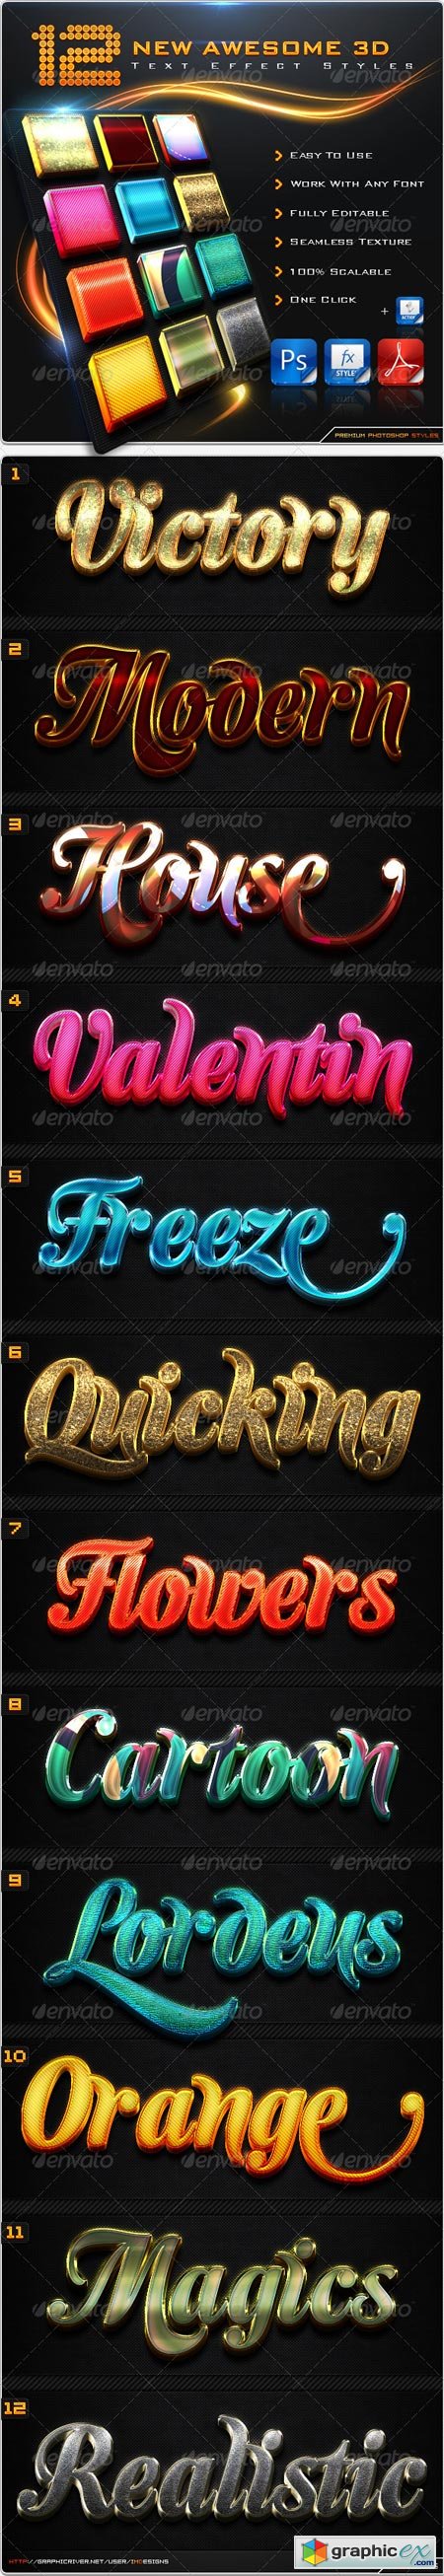 12 New Awesome 3D Text Effect Styles + Actions 8604061